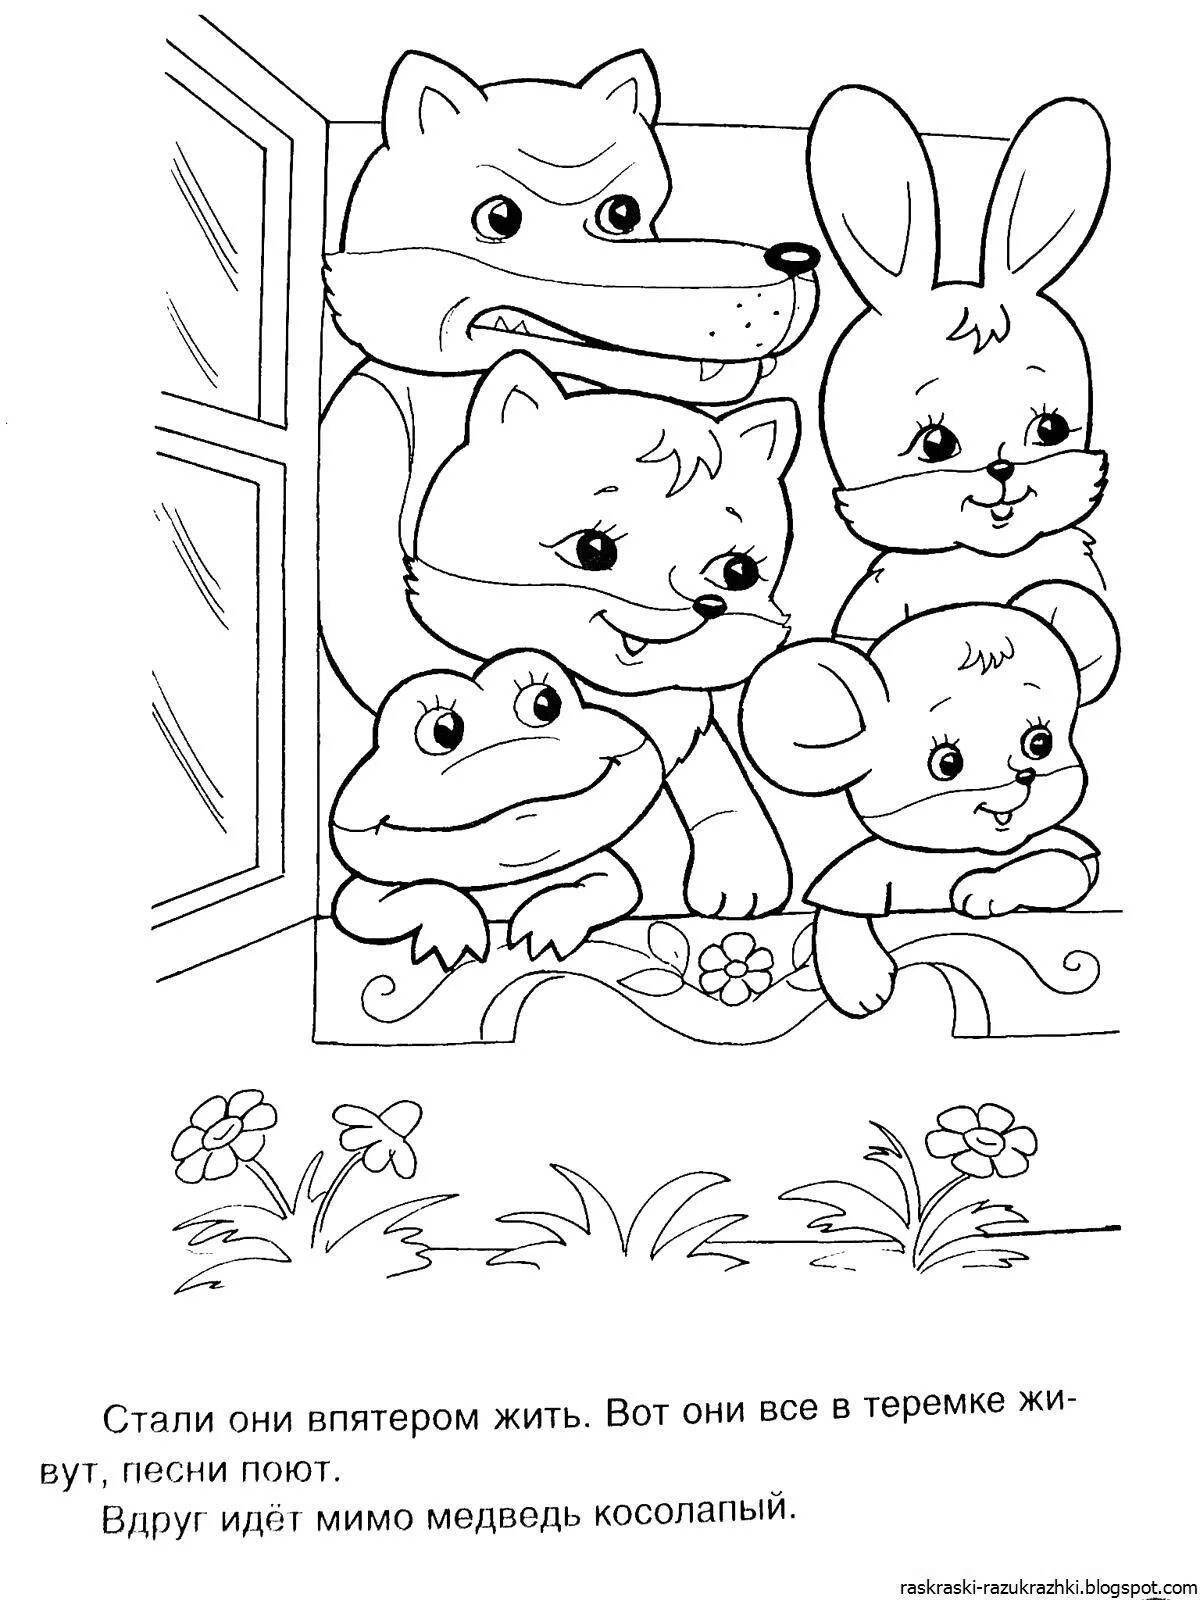 Radiant fairy tale coloring book for kids